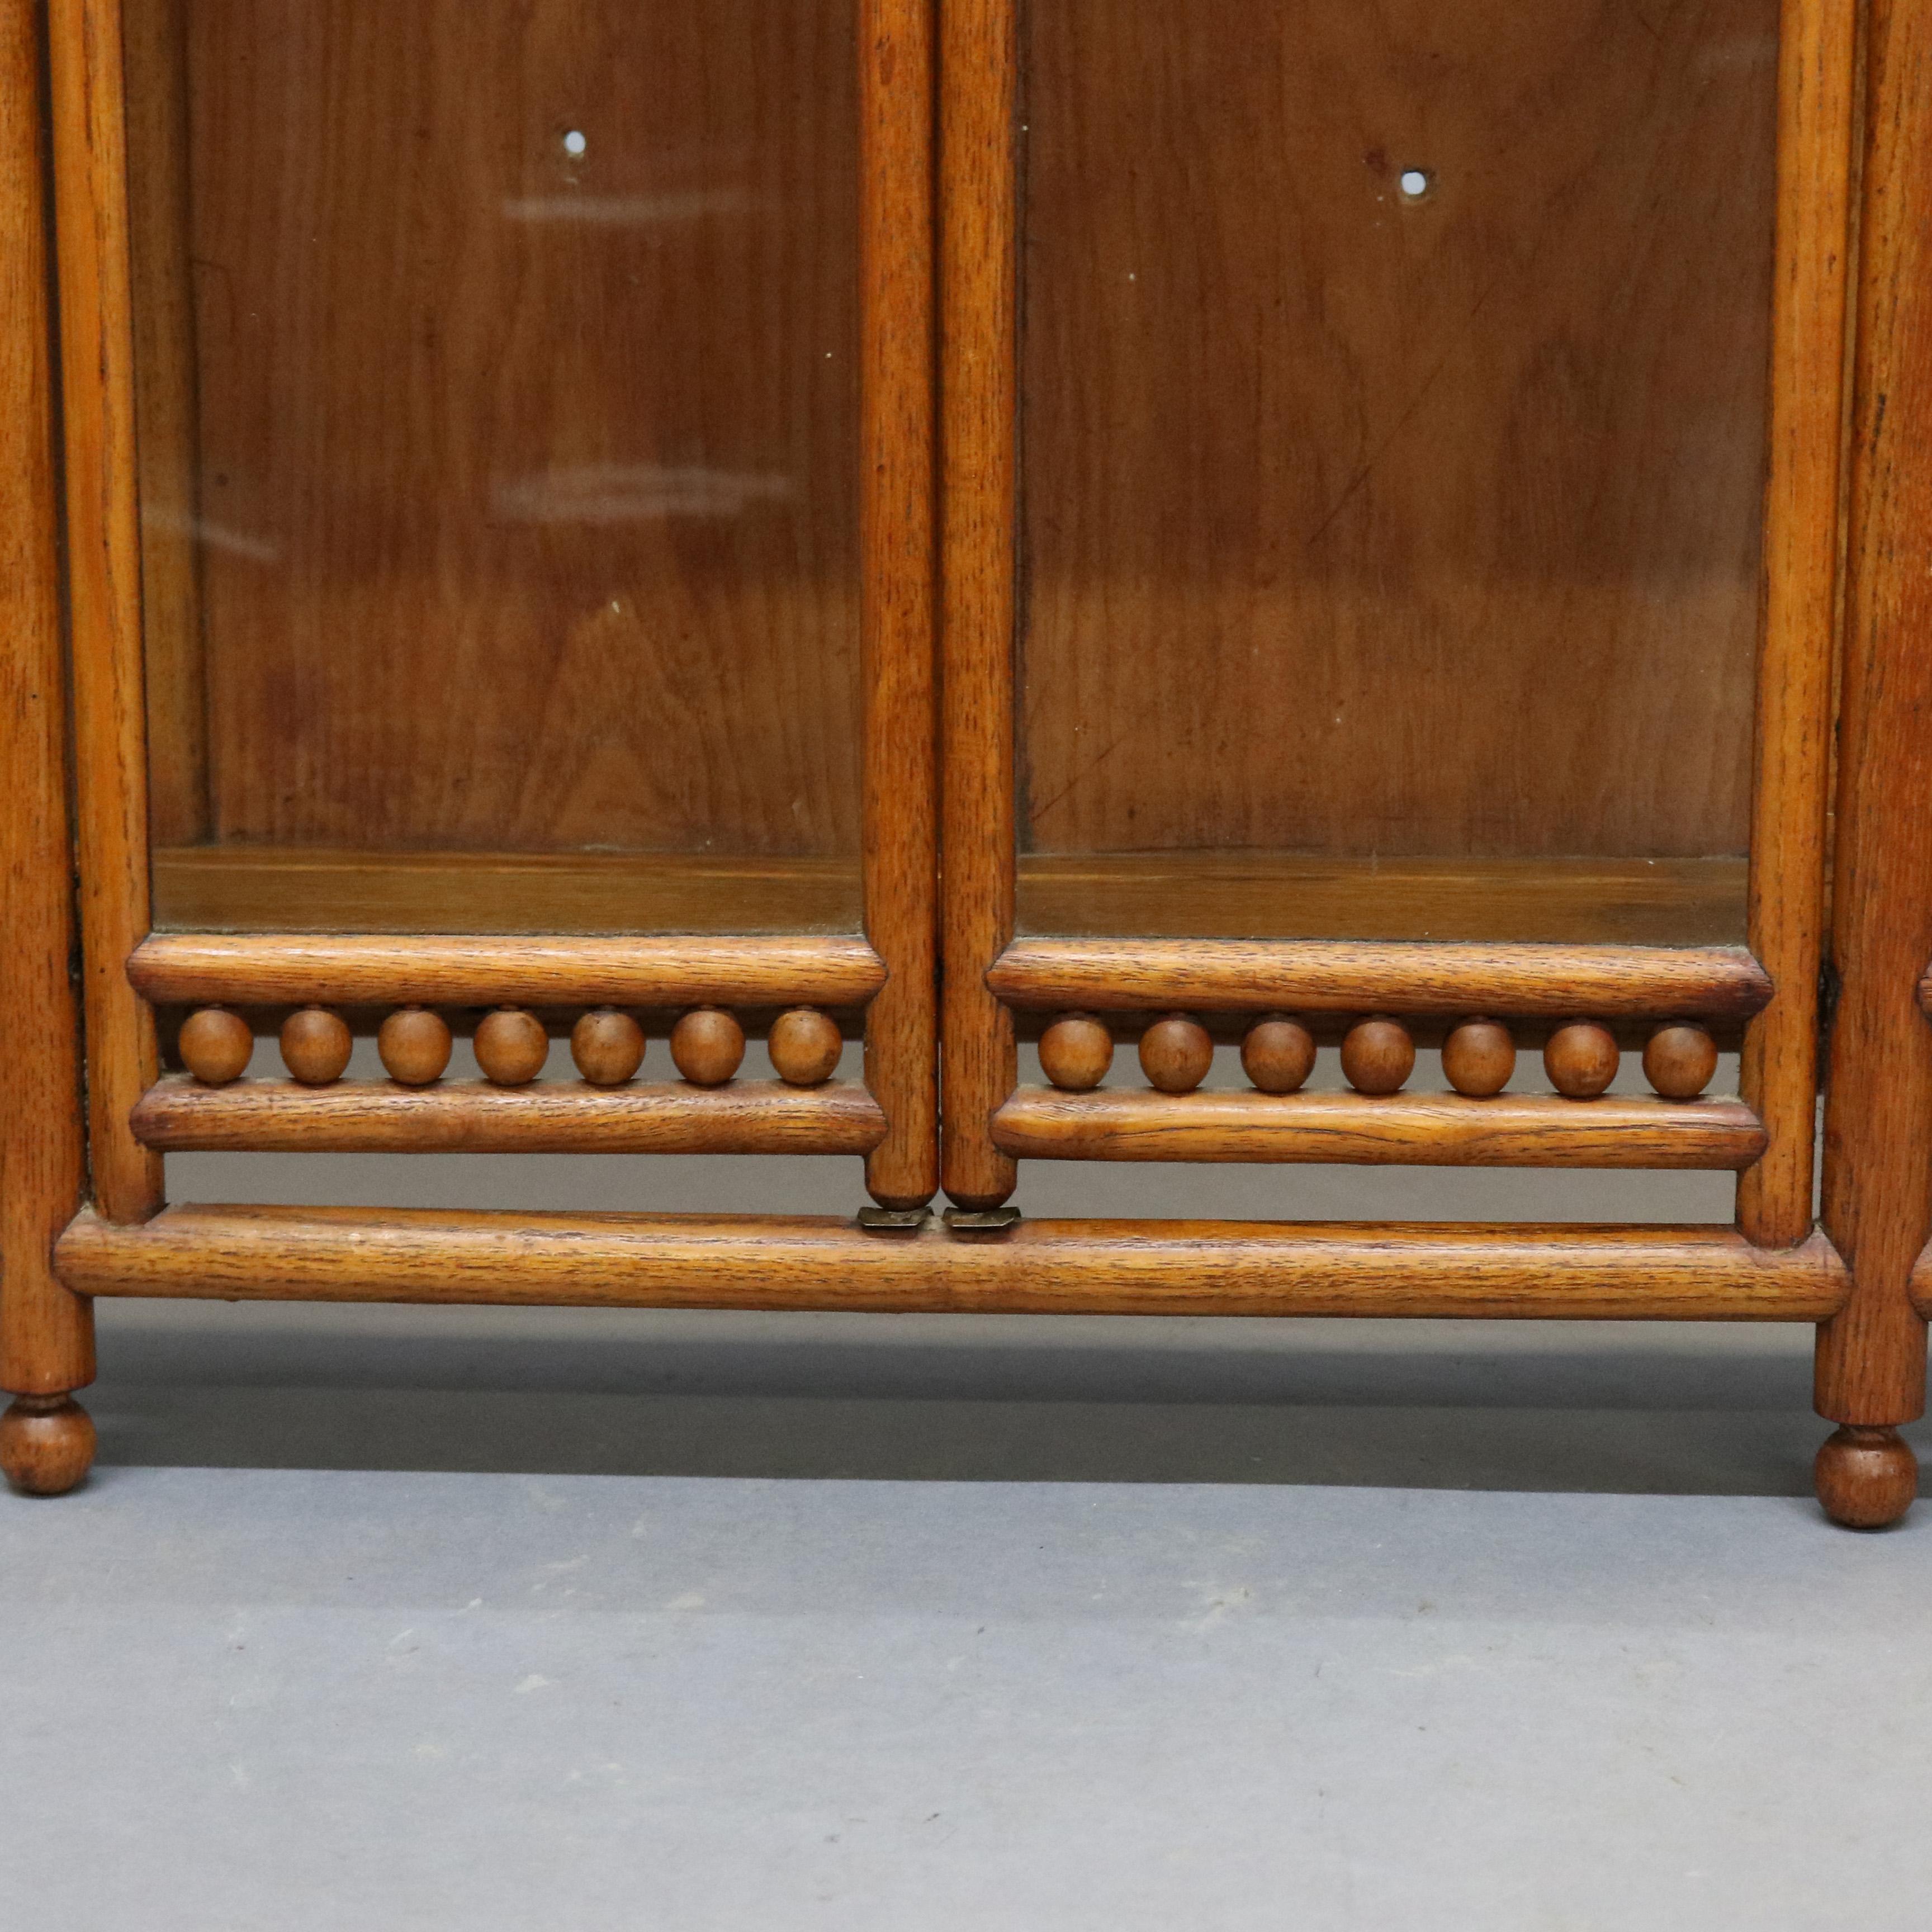 Glass Antique Victorian Stick & Ball Oak Hanging Demilune Wall Display Cabinet, c1900